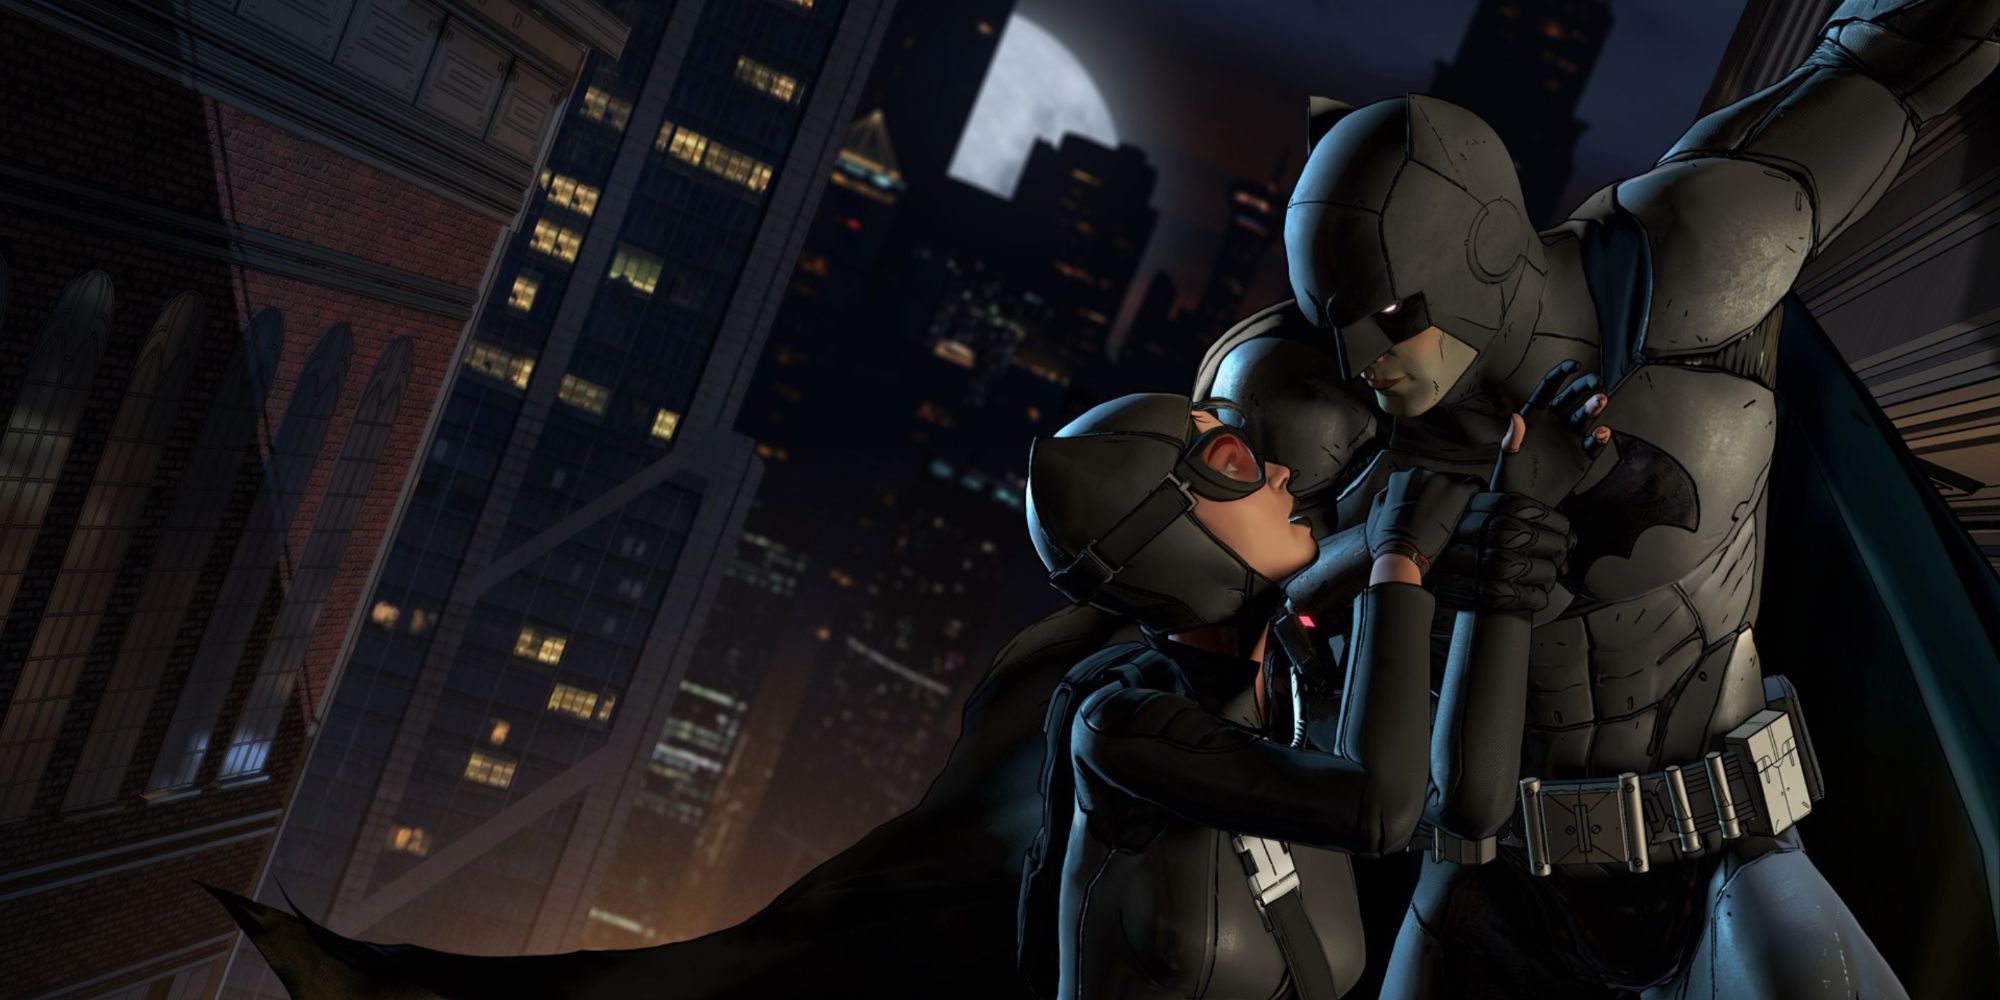 Catwoman clings to Batman as they hang in the air